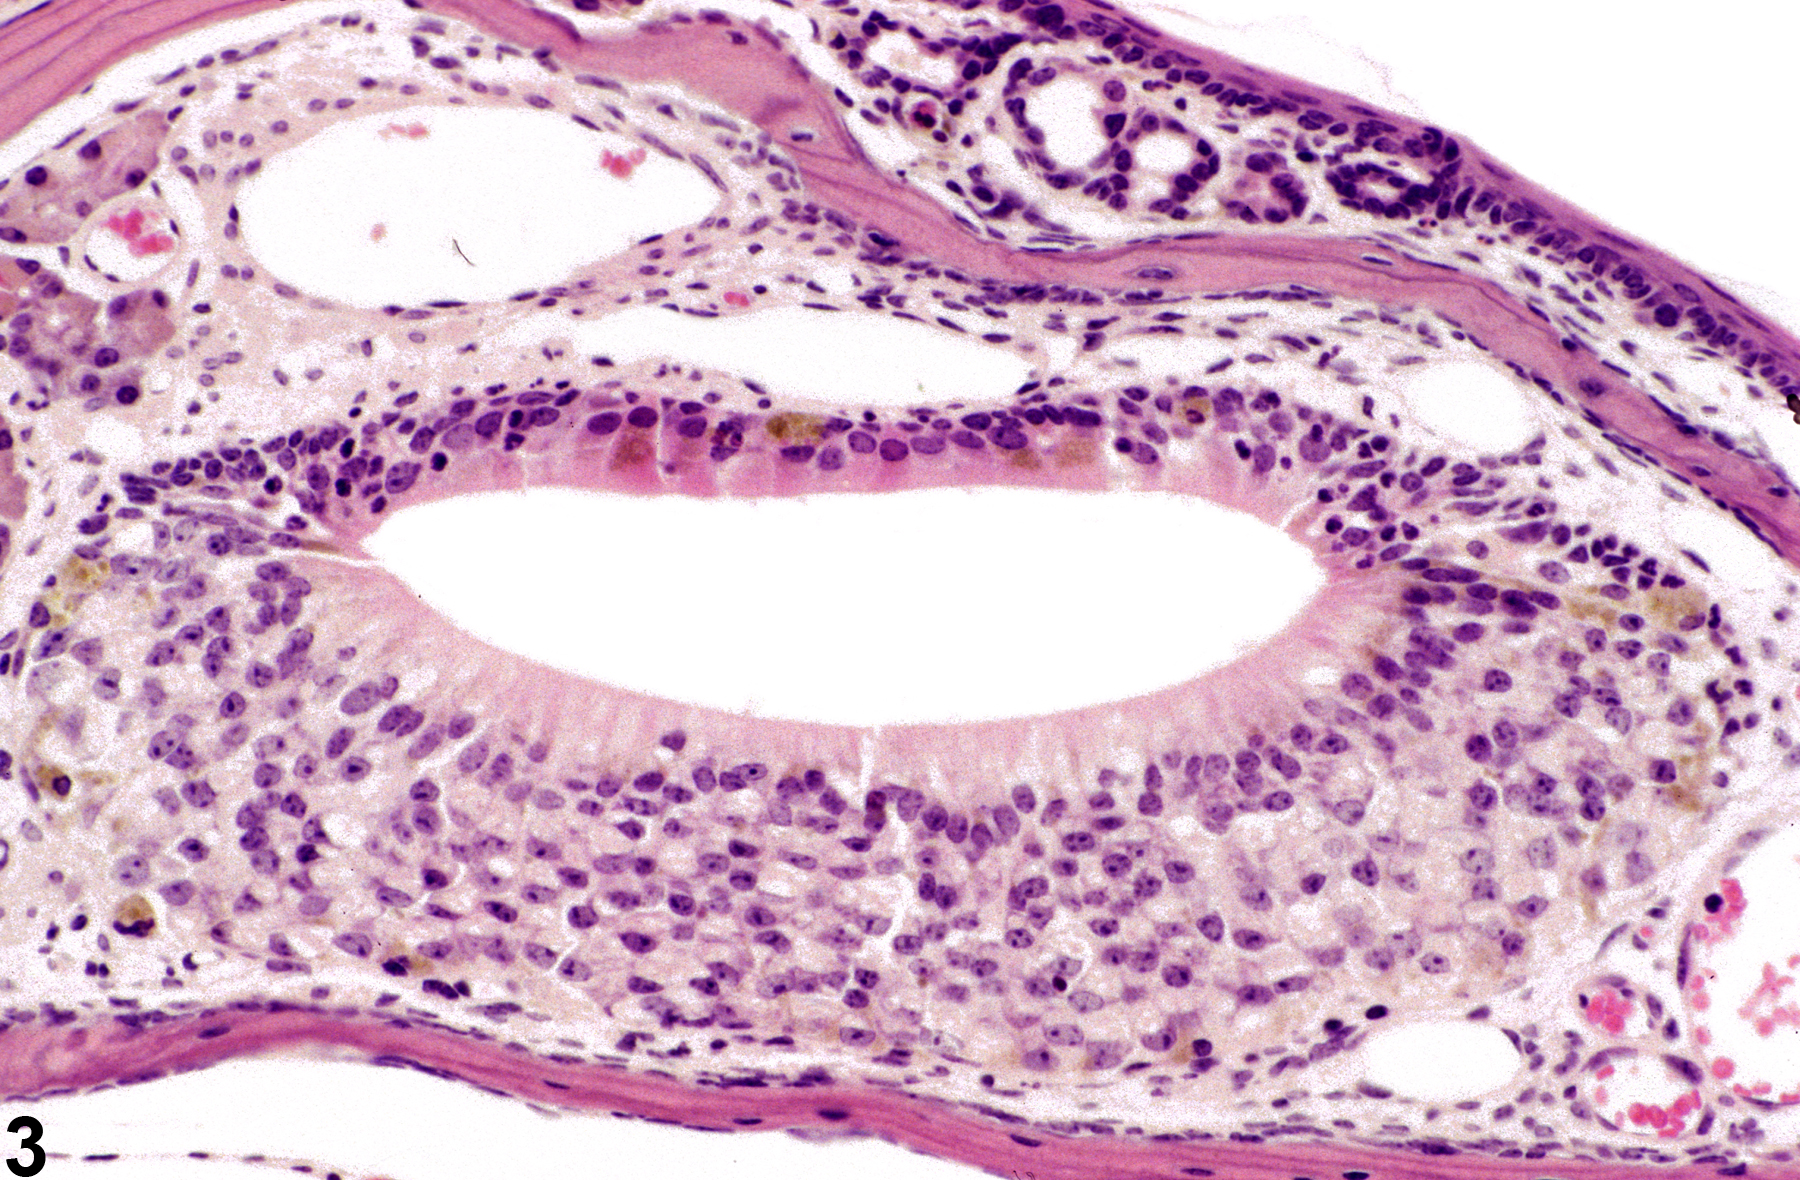 Image of pigment in the nose, vomeronasal organ from a female B6C3F1/N mouse in a subchronic study